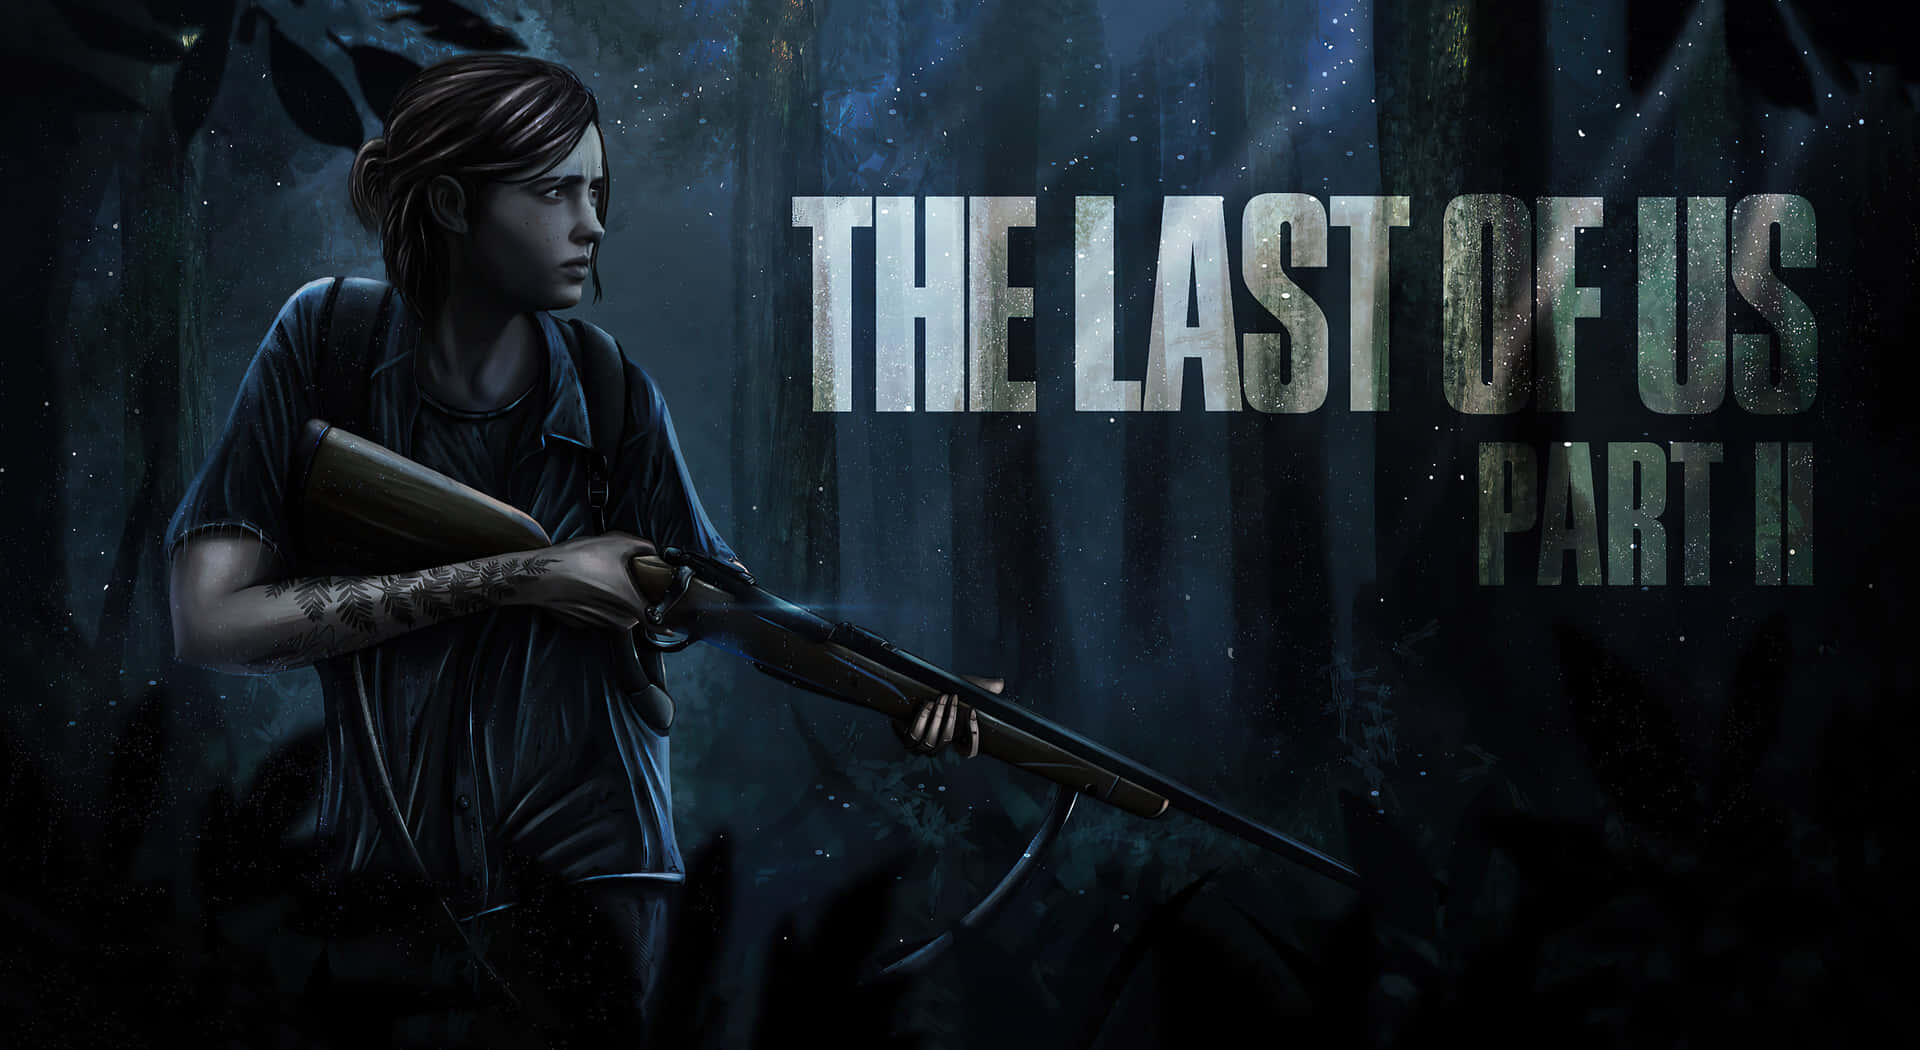 HD the last of us part 2 wallpapers